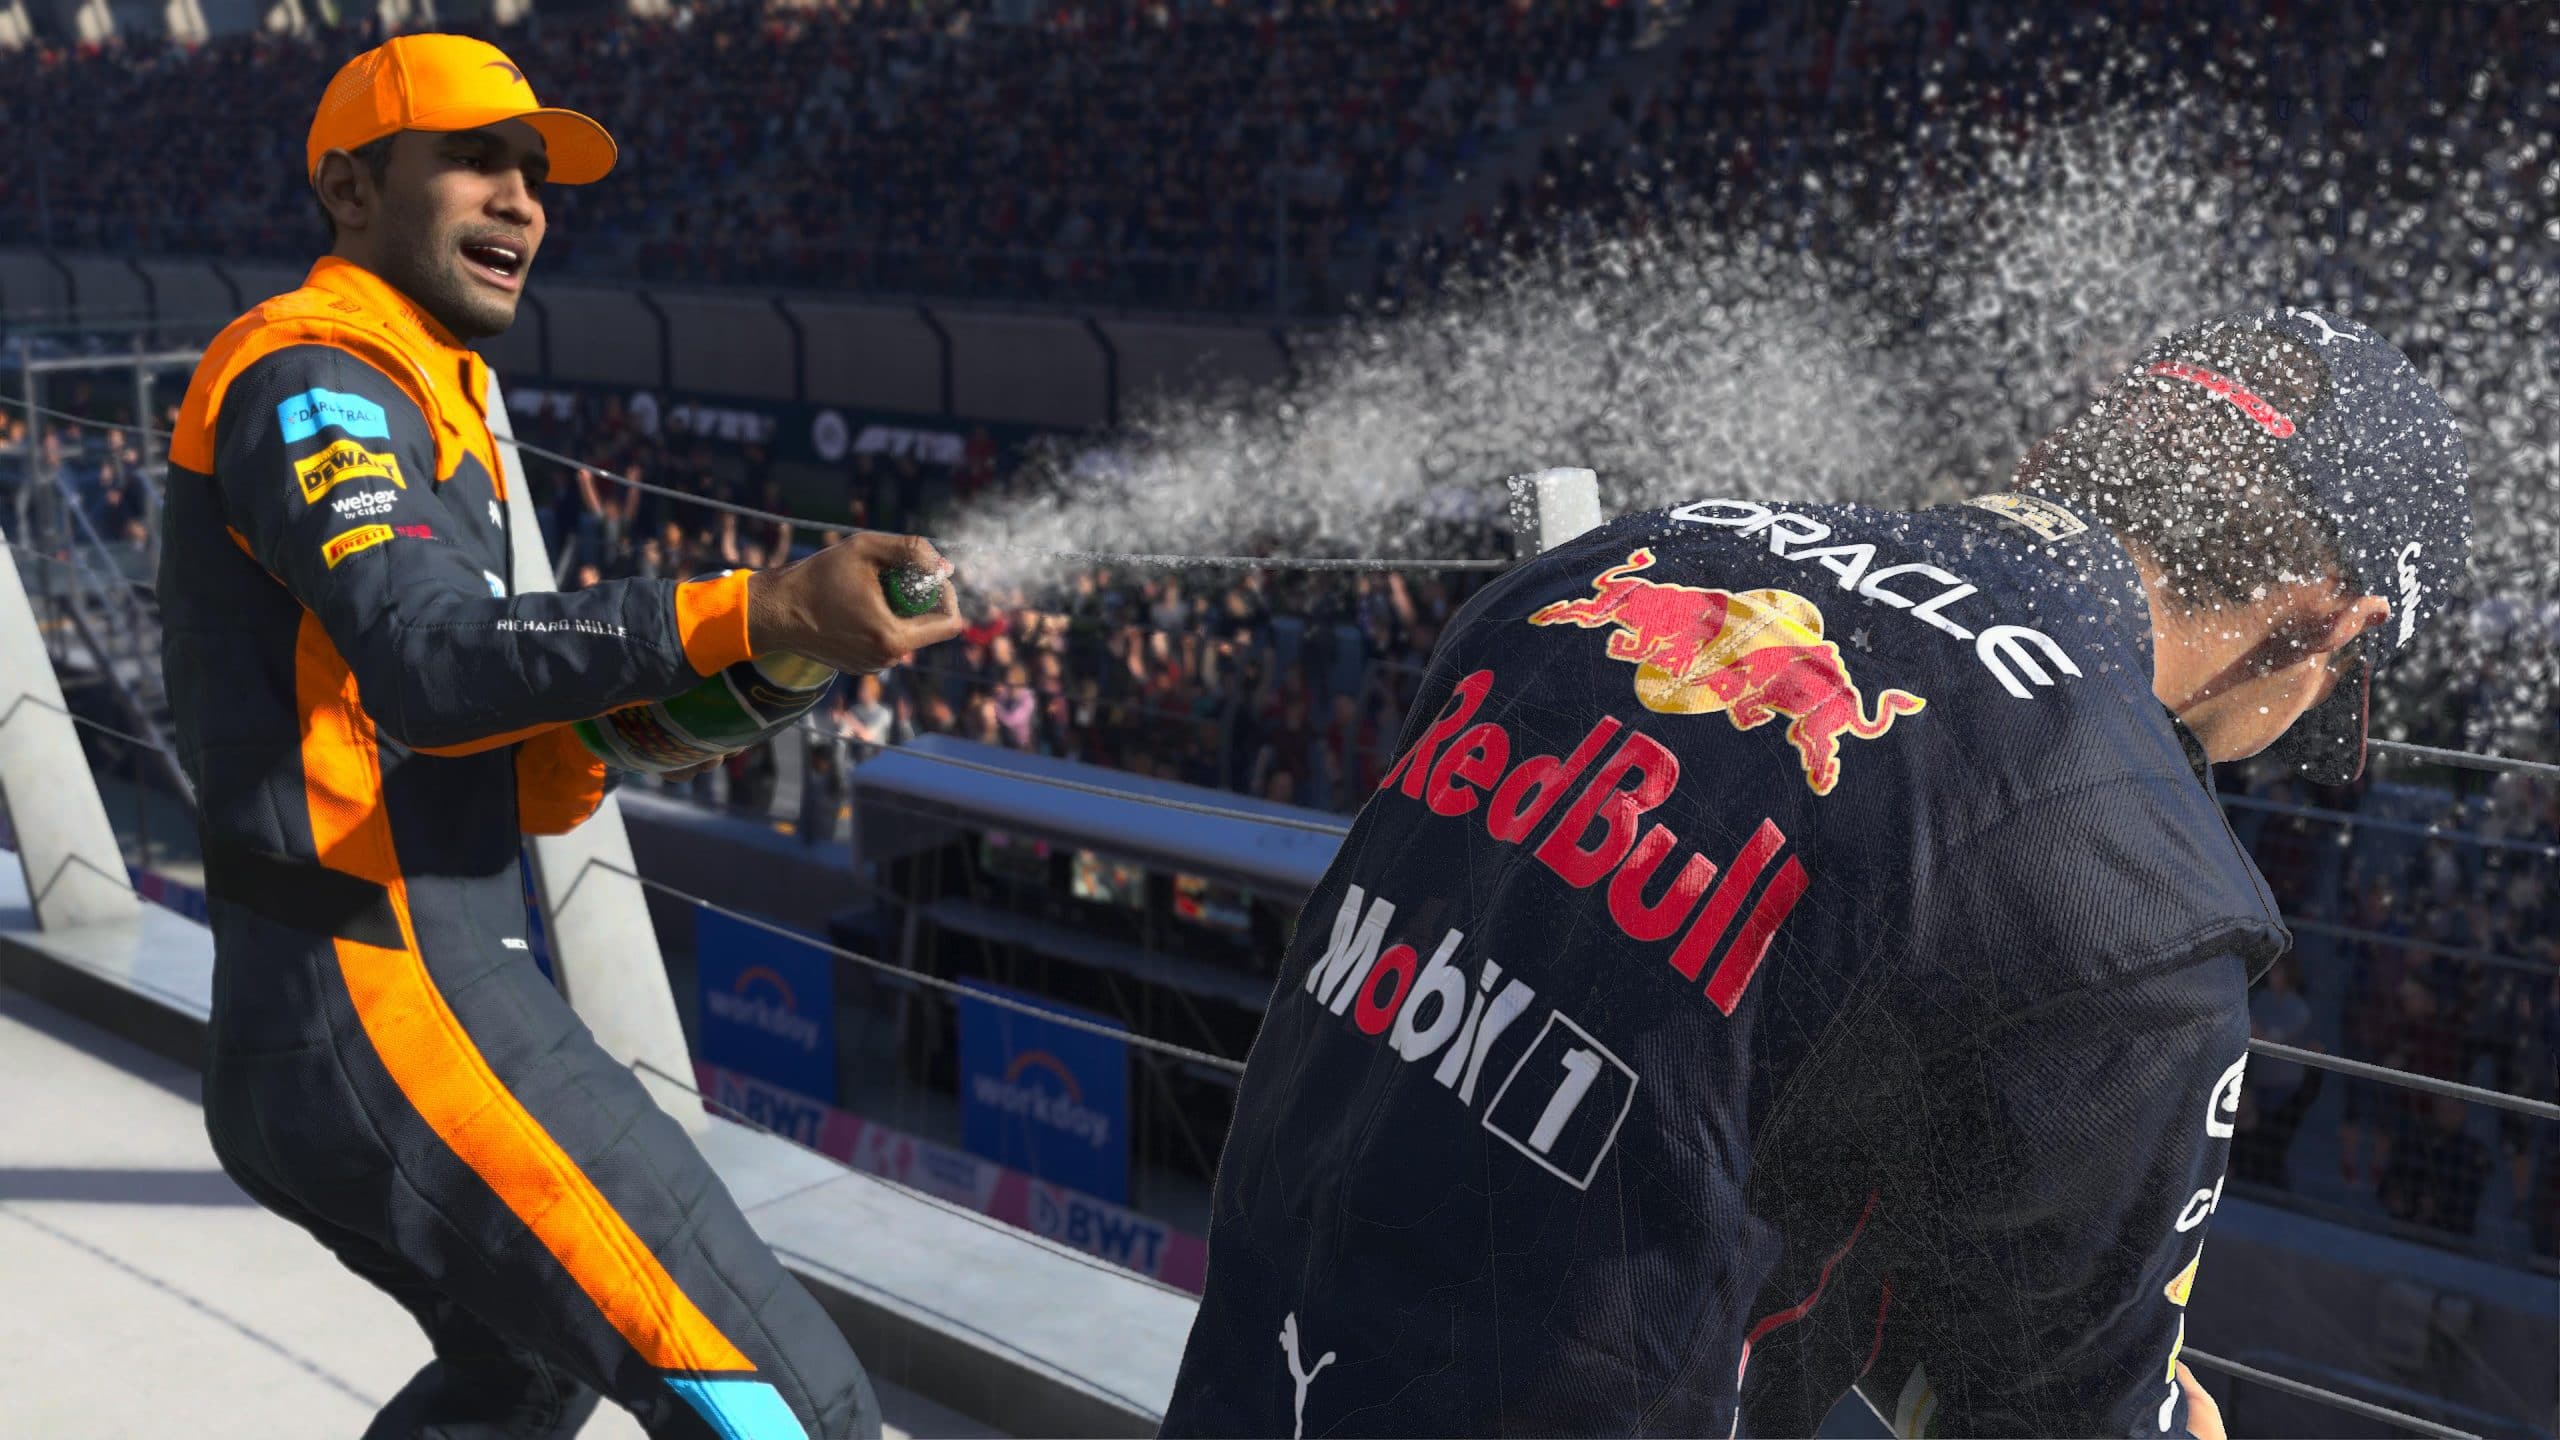 Lack of sinking in F1 22 career mode (Photo: Reproduction / Thiago Barros)